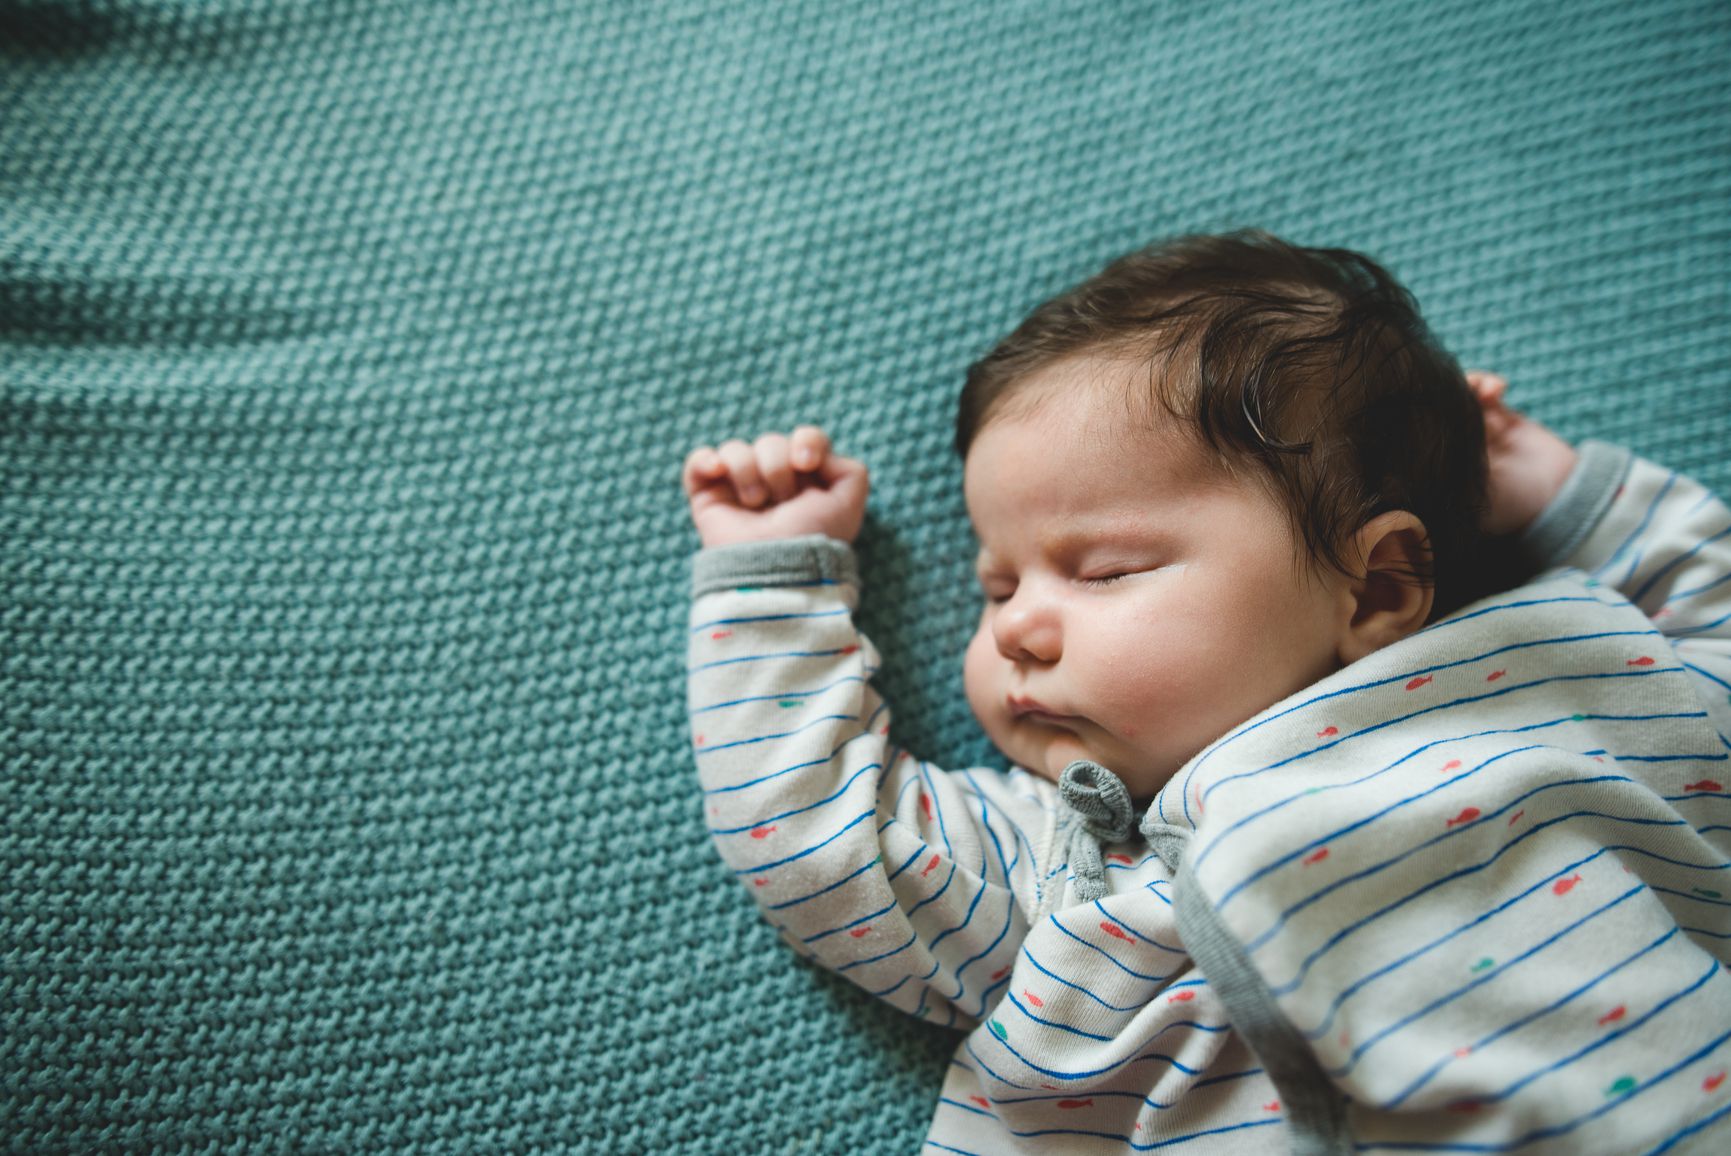 When Should Your Baby Sleep Through the Night?